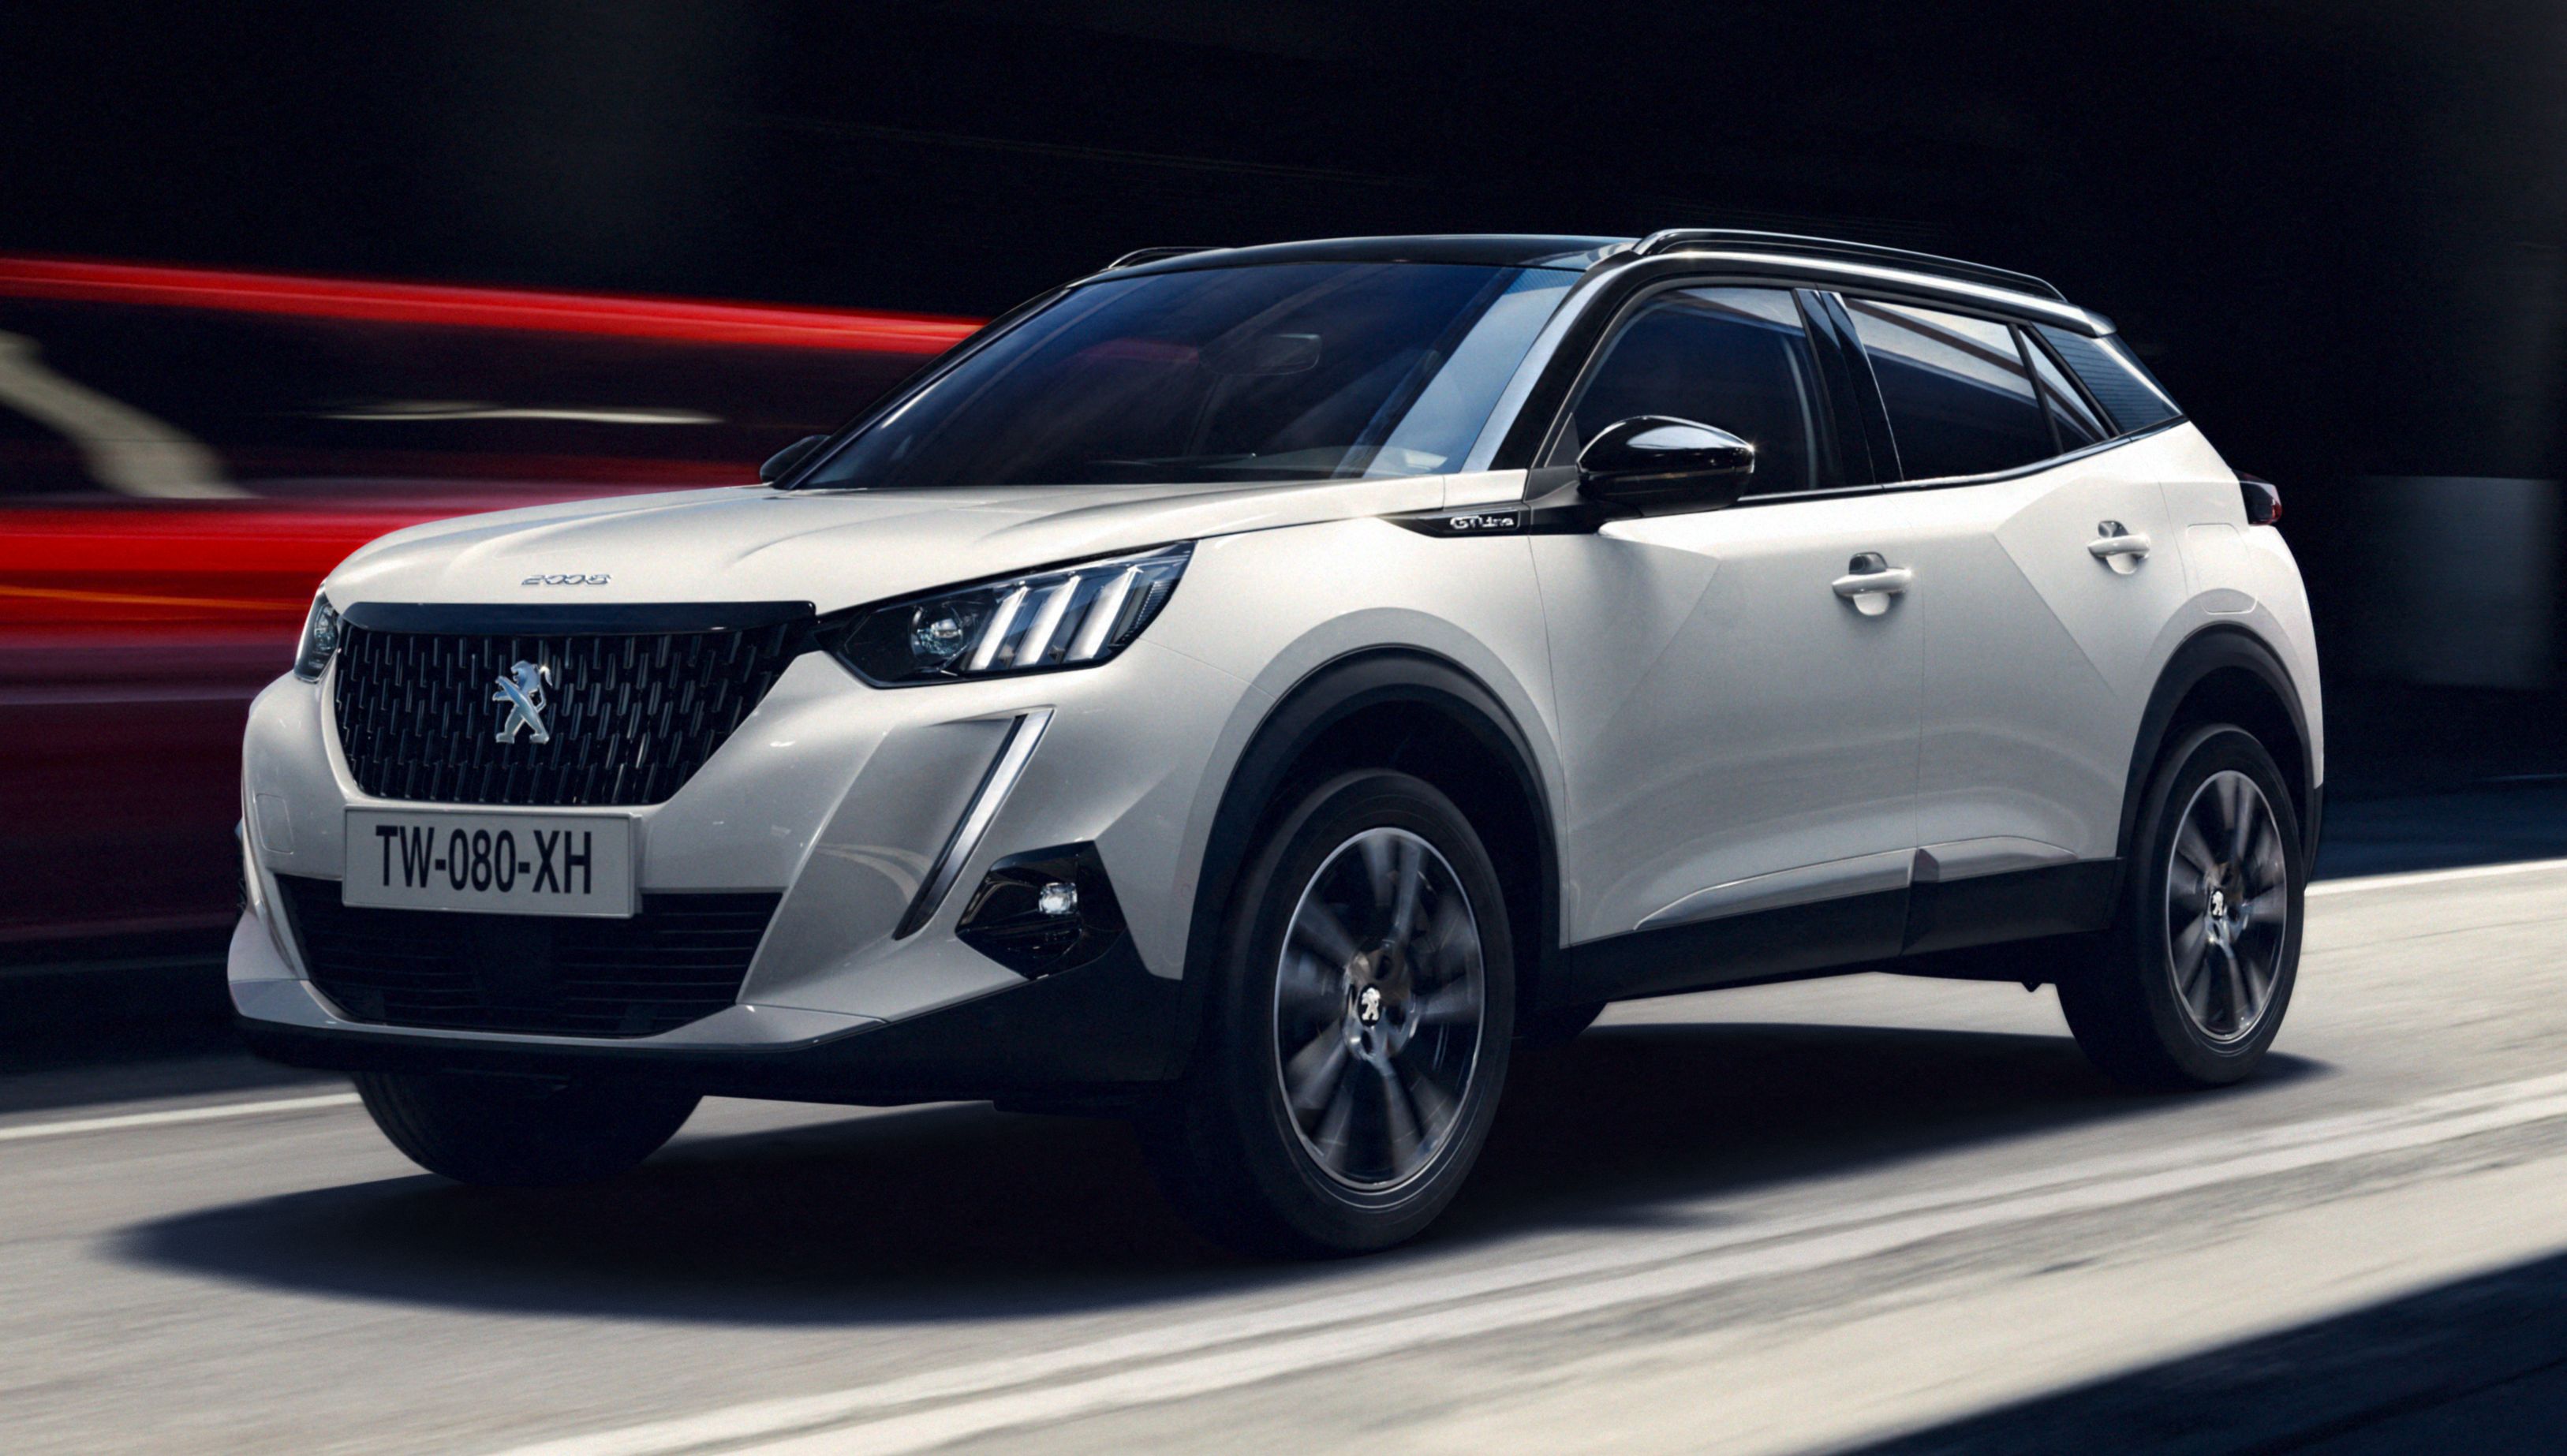 2019 Peugeot 2008 Revealed Based On New 208 With Lots Of Tech Electric E 2008 Variant With 310 Km Range Paultan Org